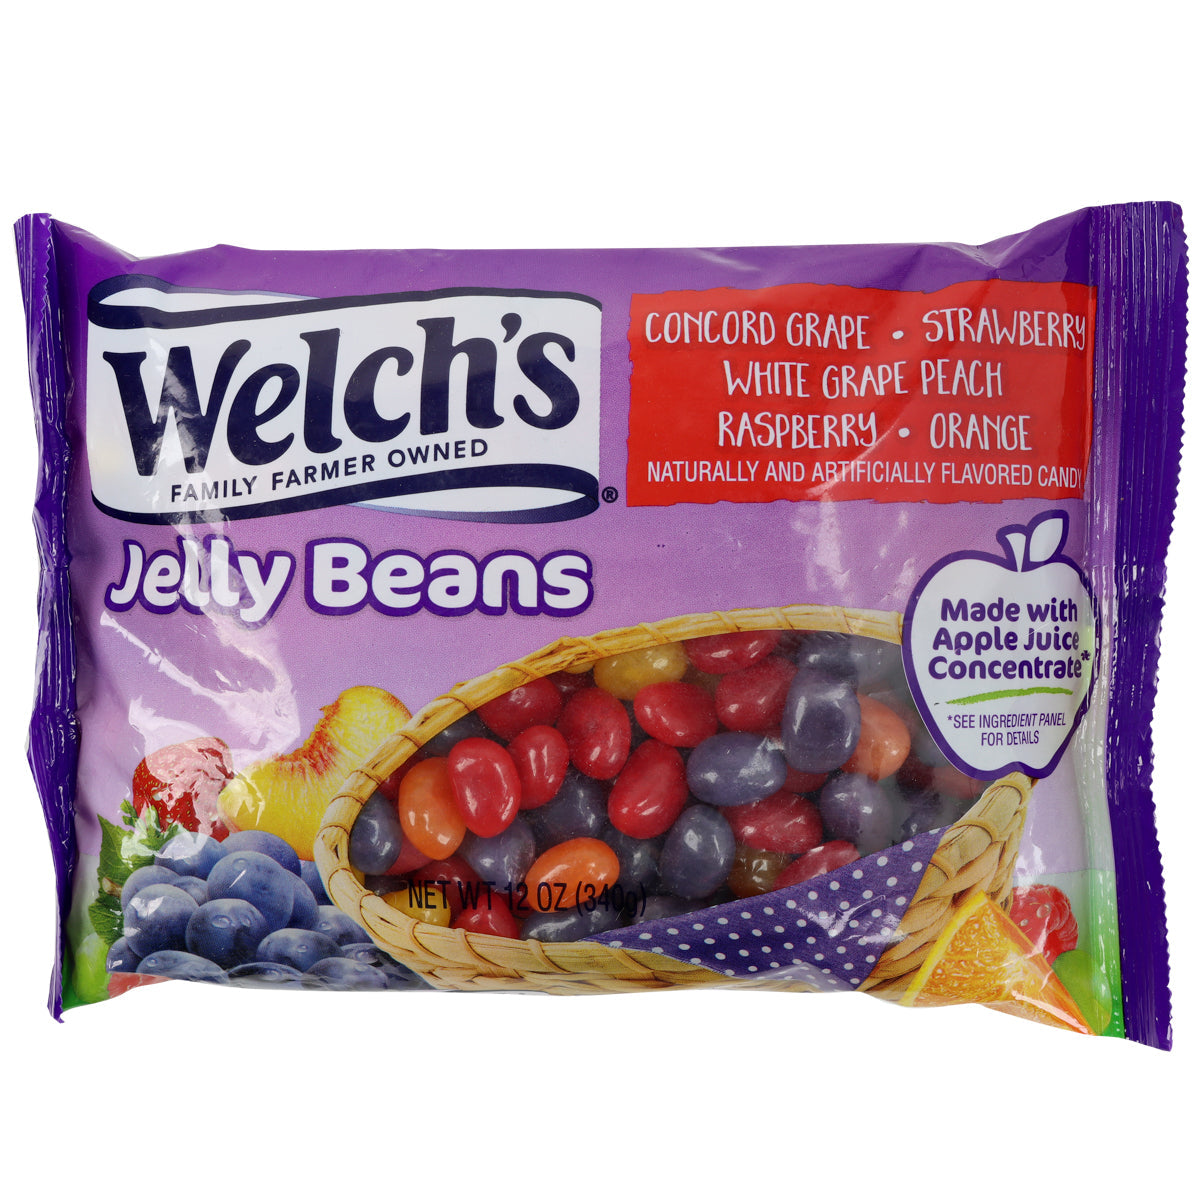 Purple bag with colorful jelly beans and art of picnic basket and fruit